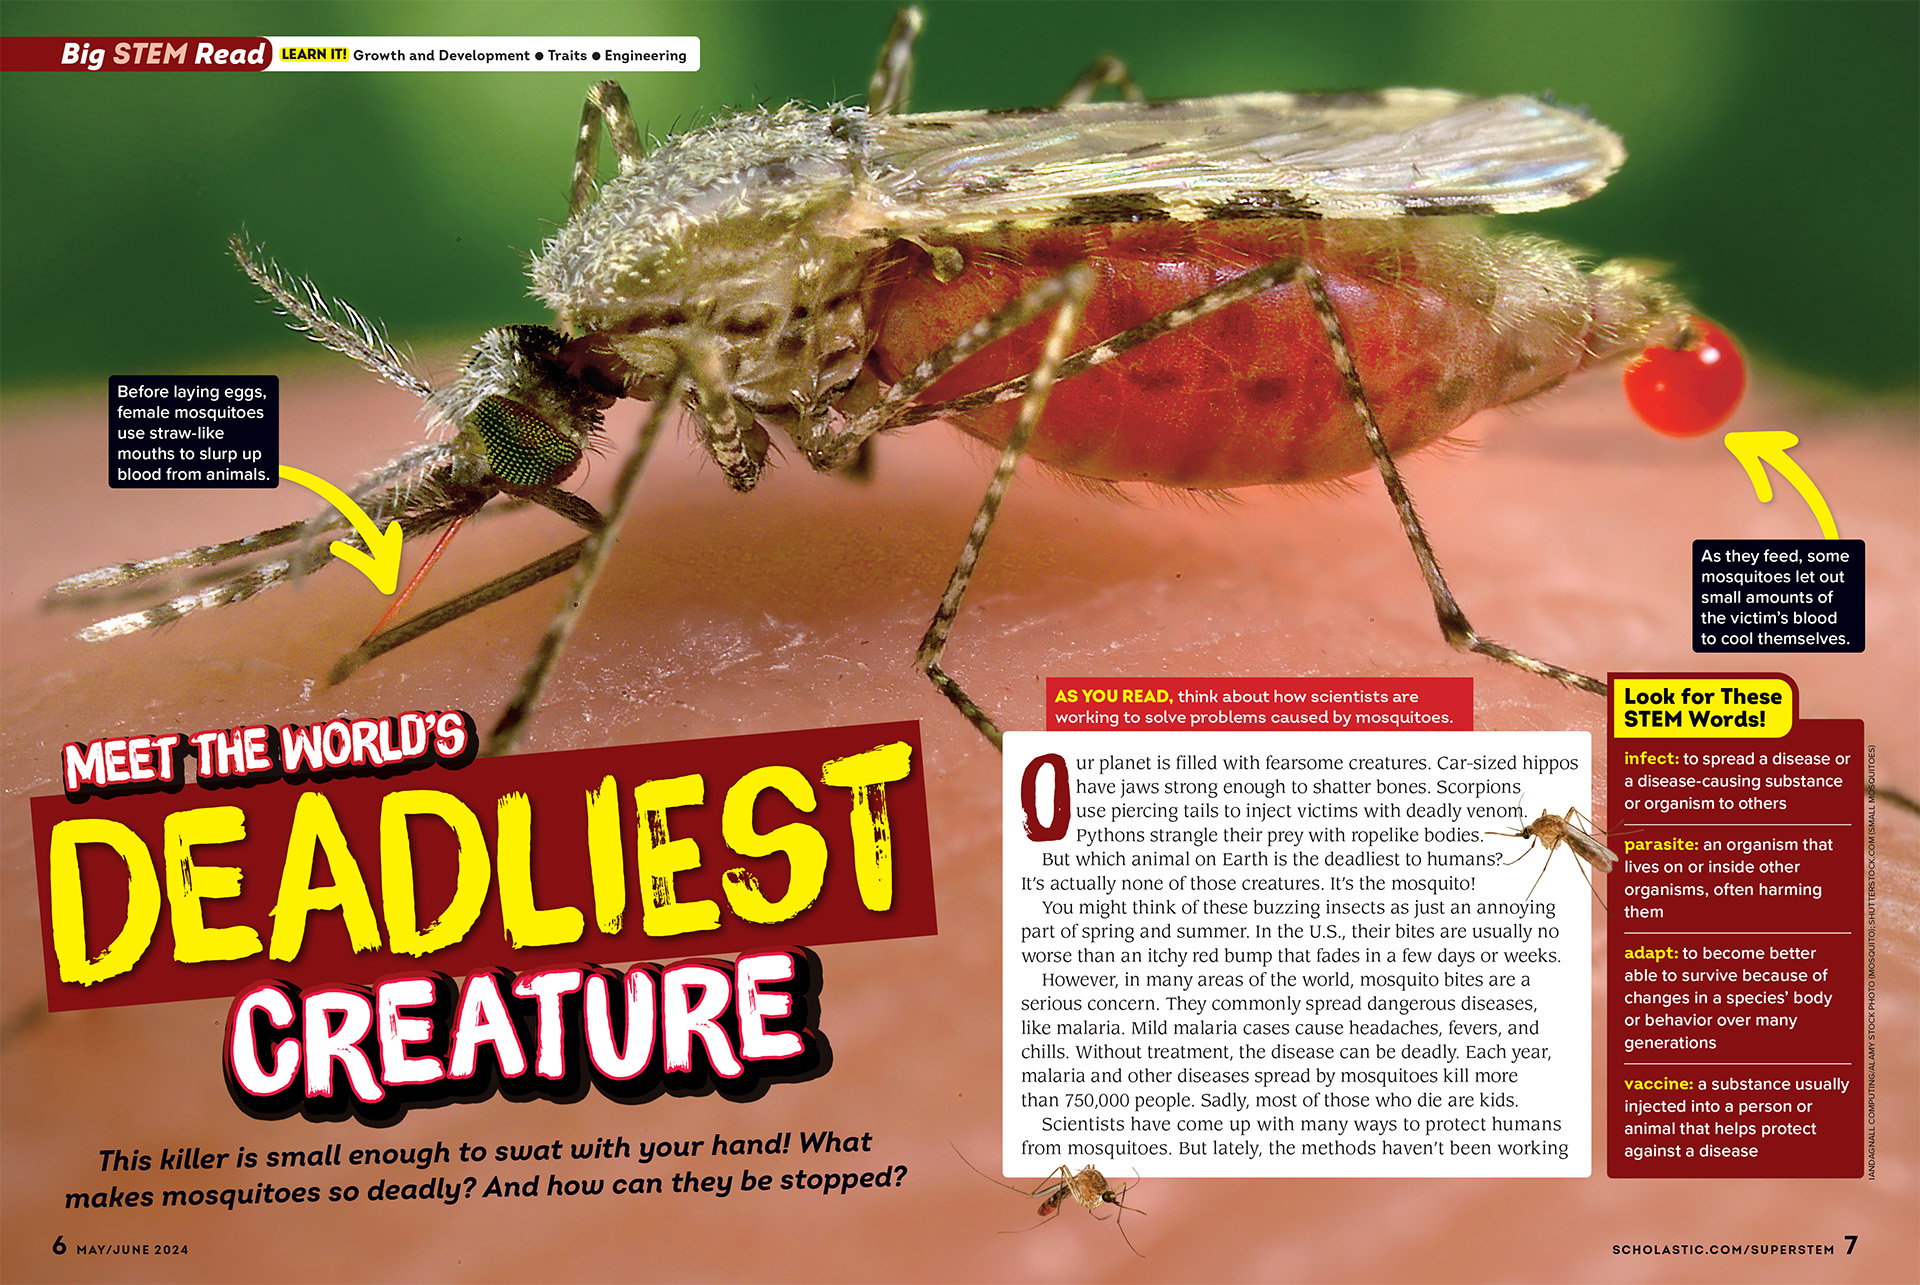 An enlarged image of a mosquito with the text "Meet the World's Deadliest Creature".